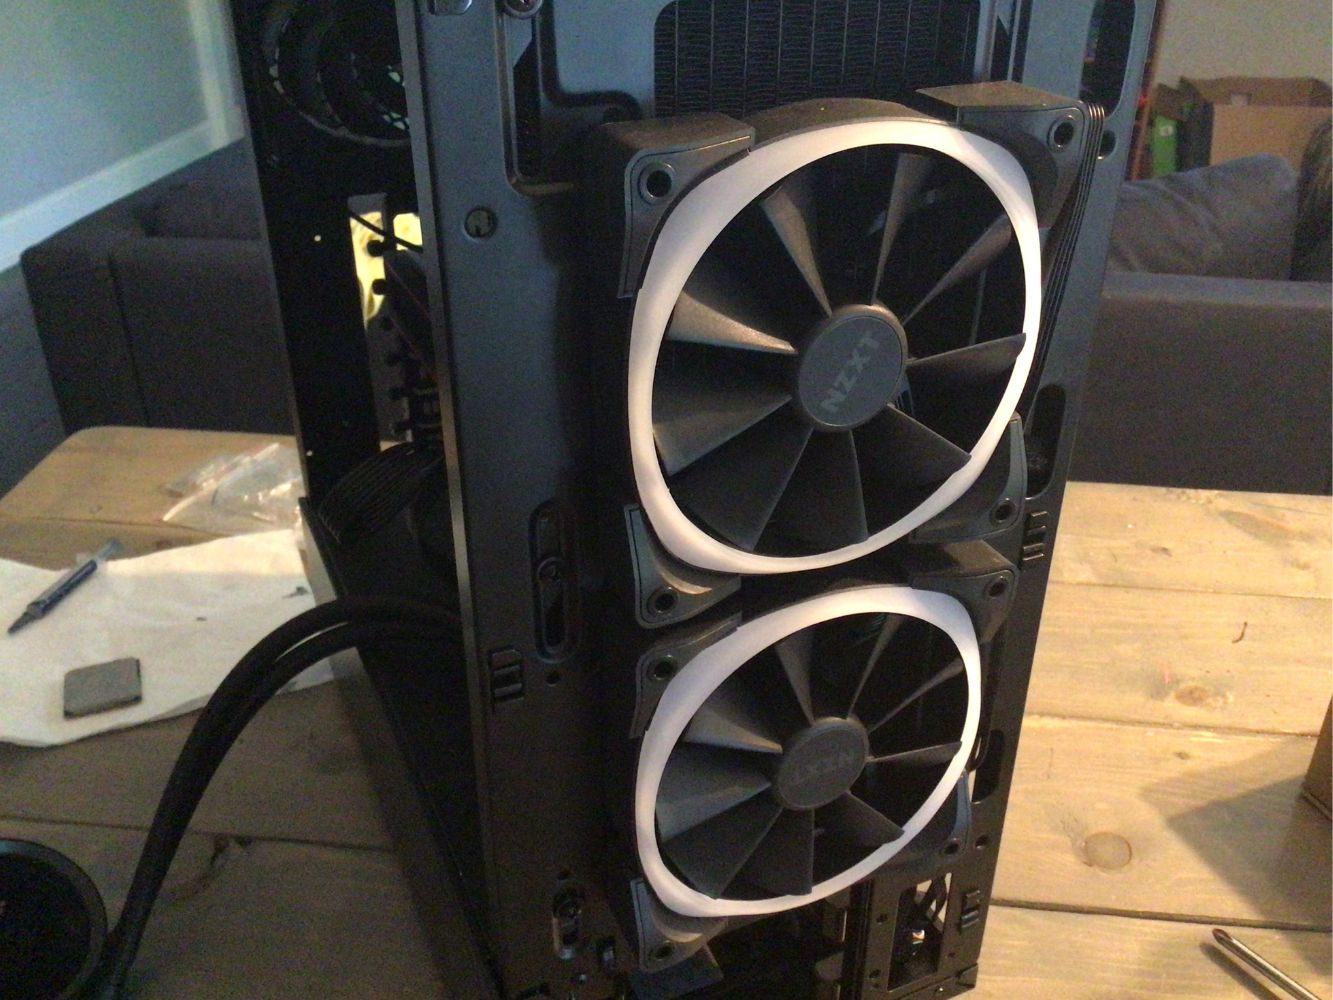 How To Cover Up Fan Holes In PC Case